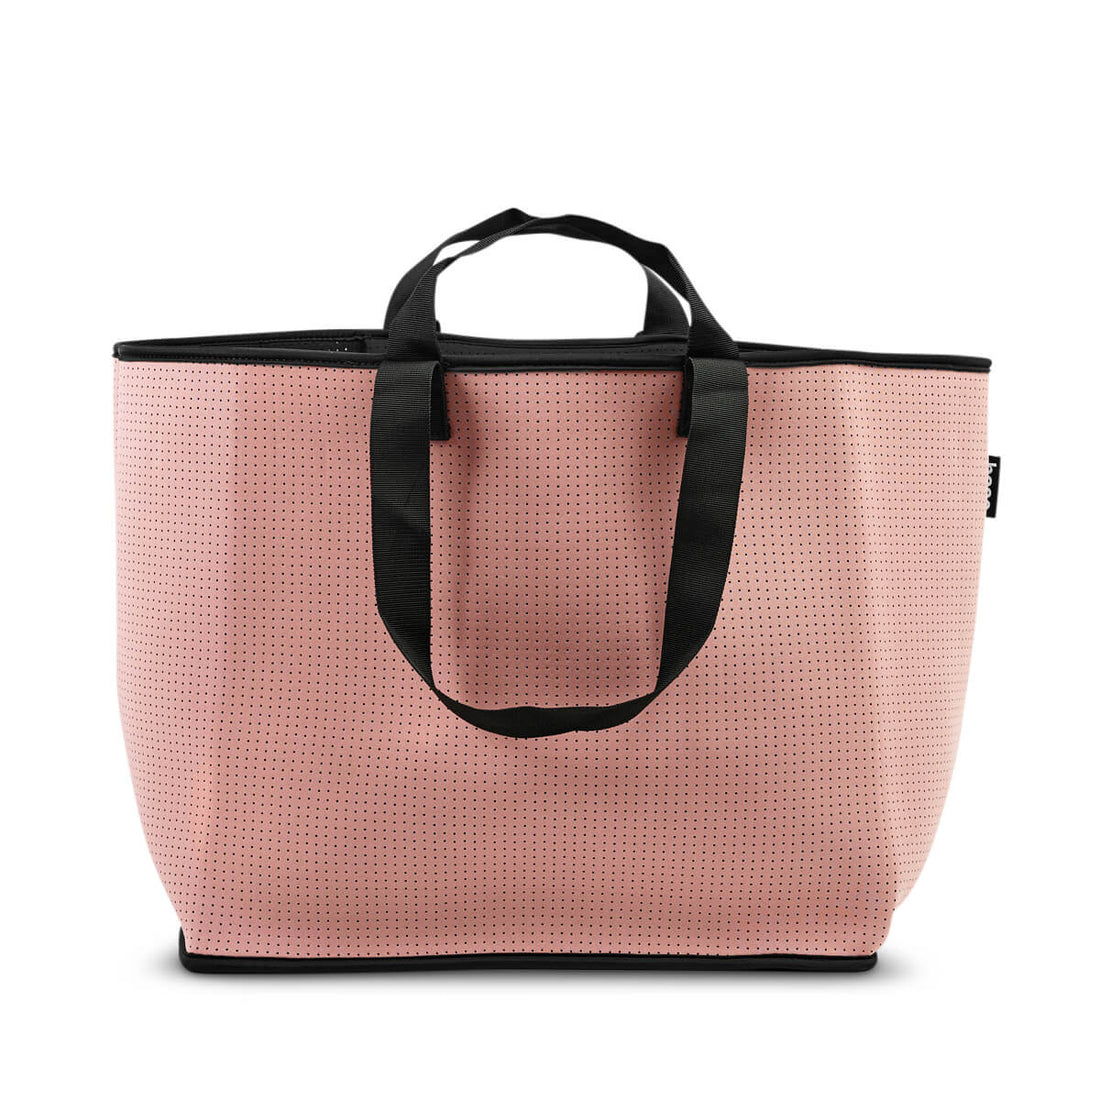 Neoprene bag in musk from the front